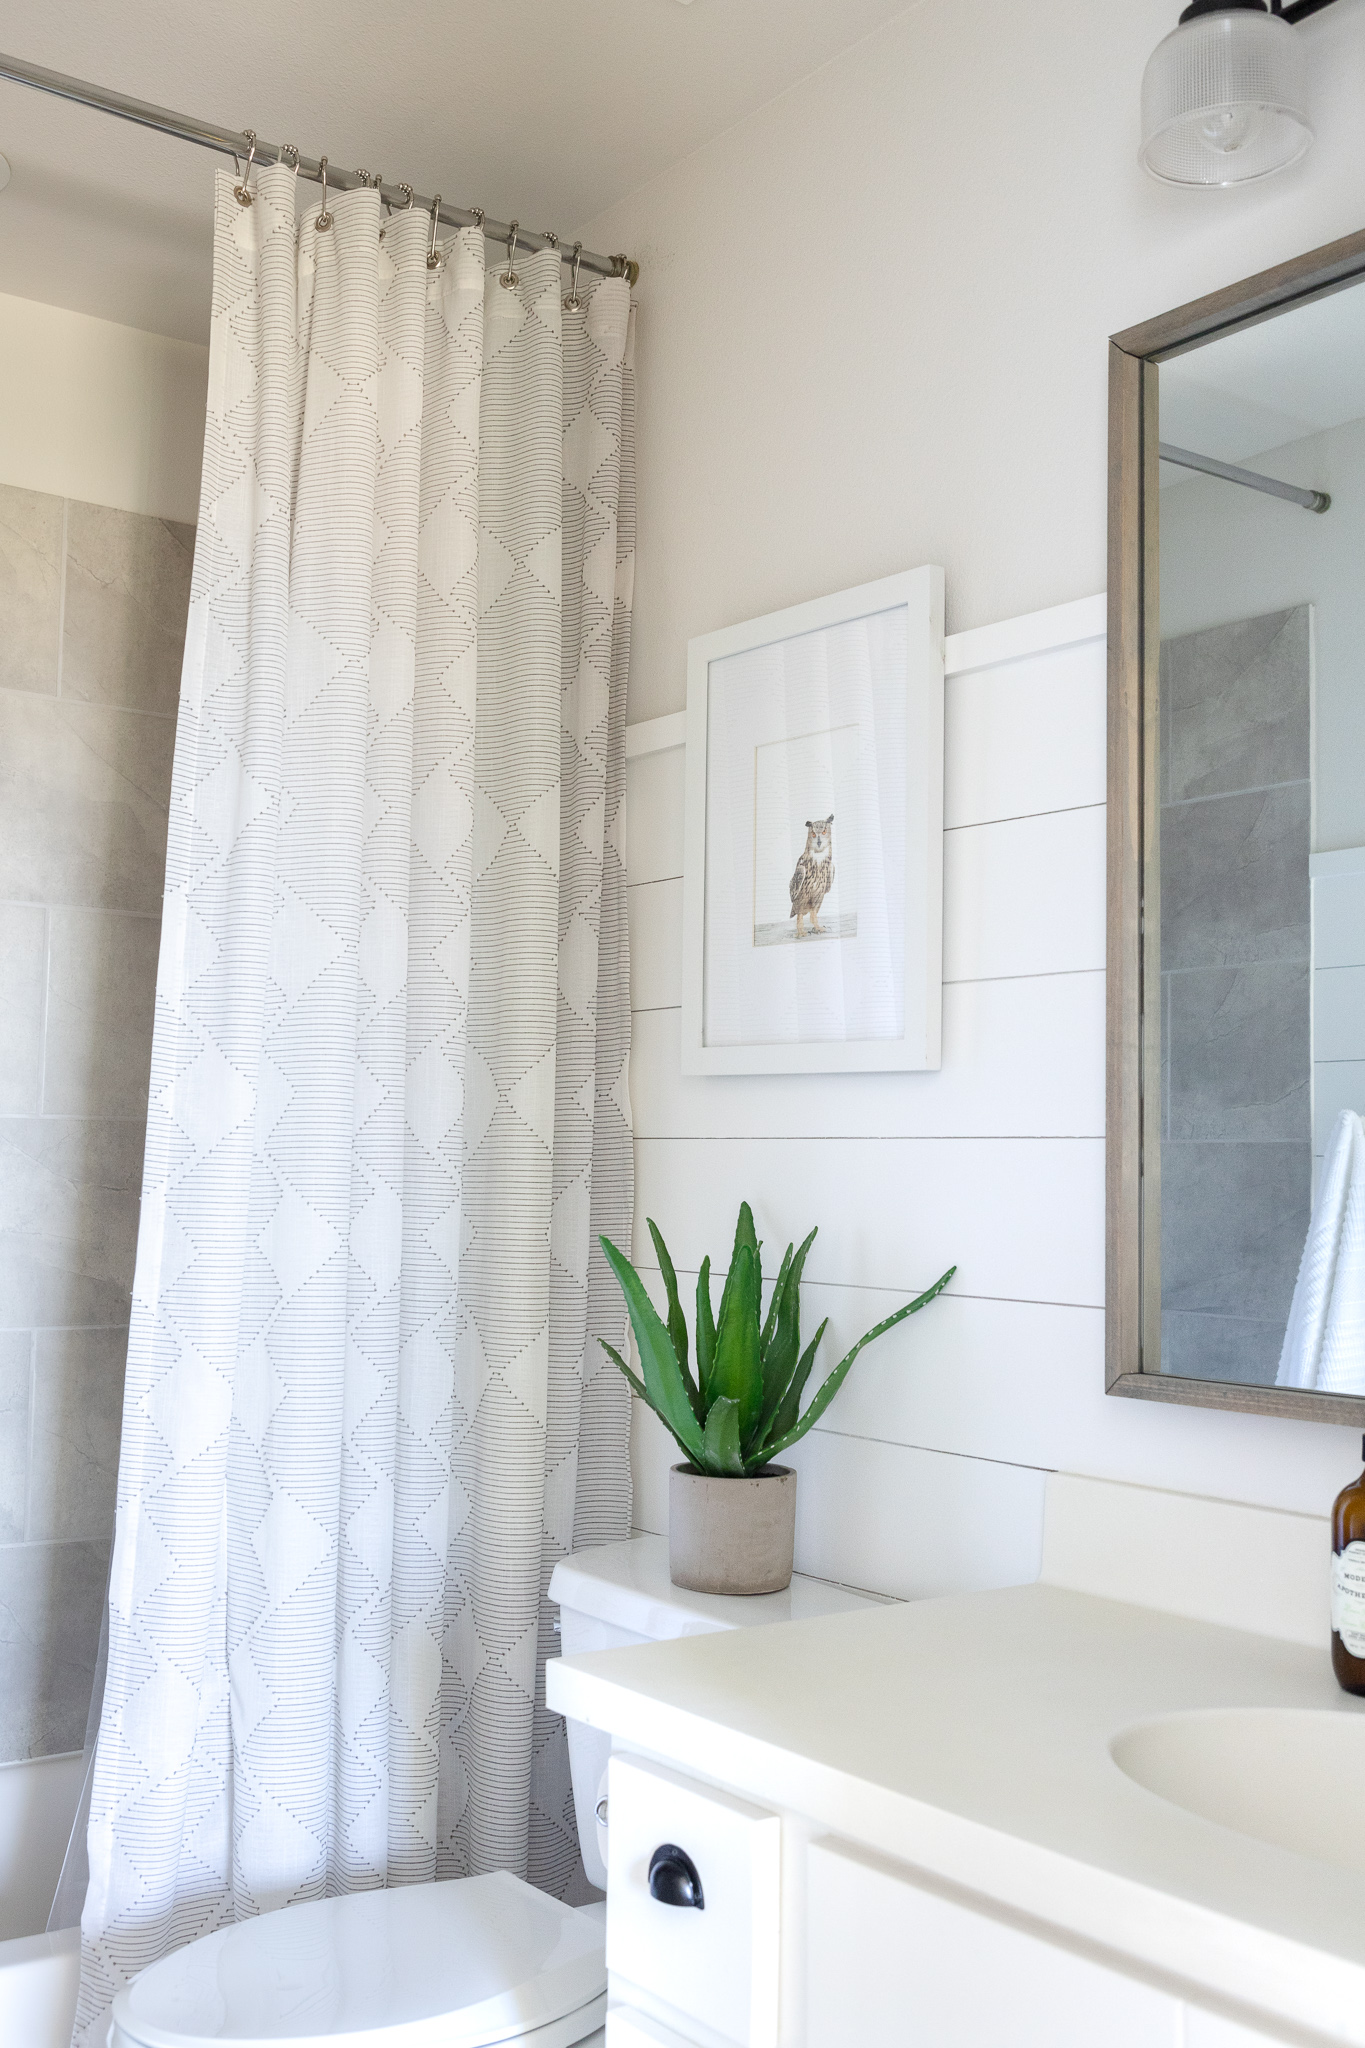 DIY shower curtain from window drapes